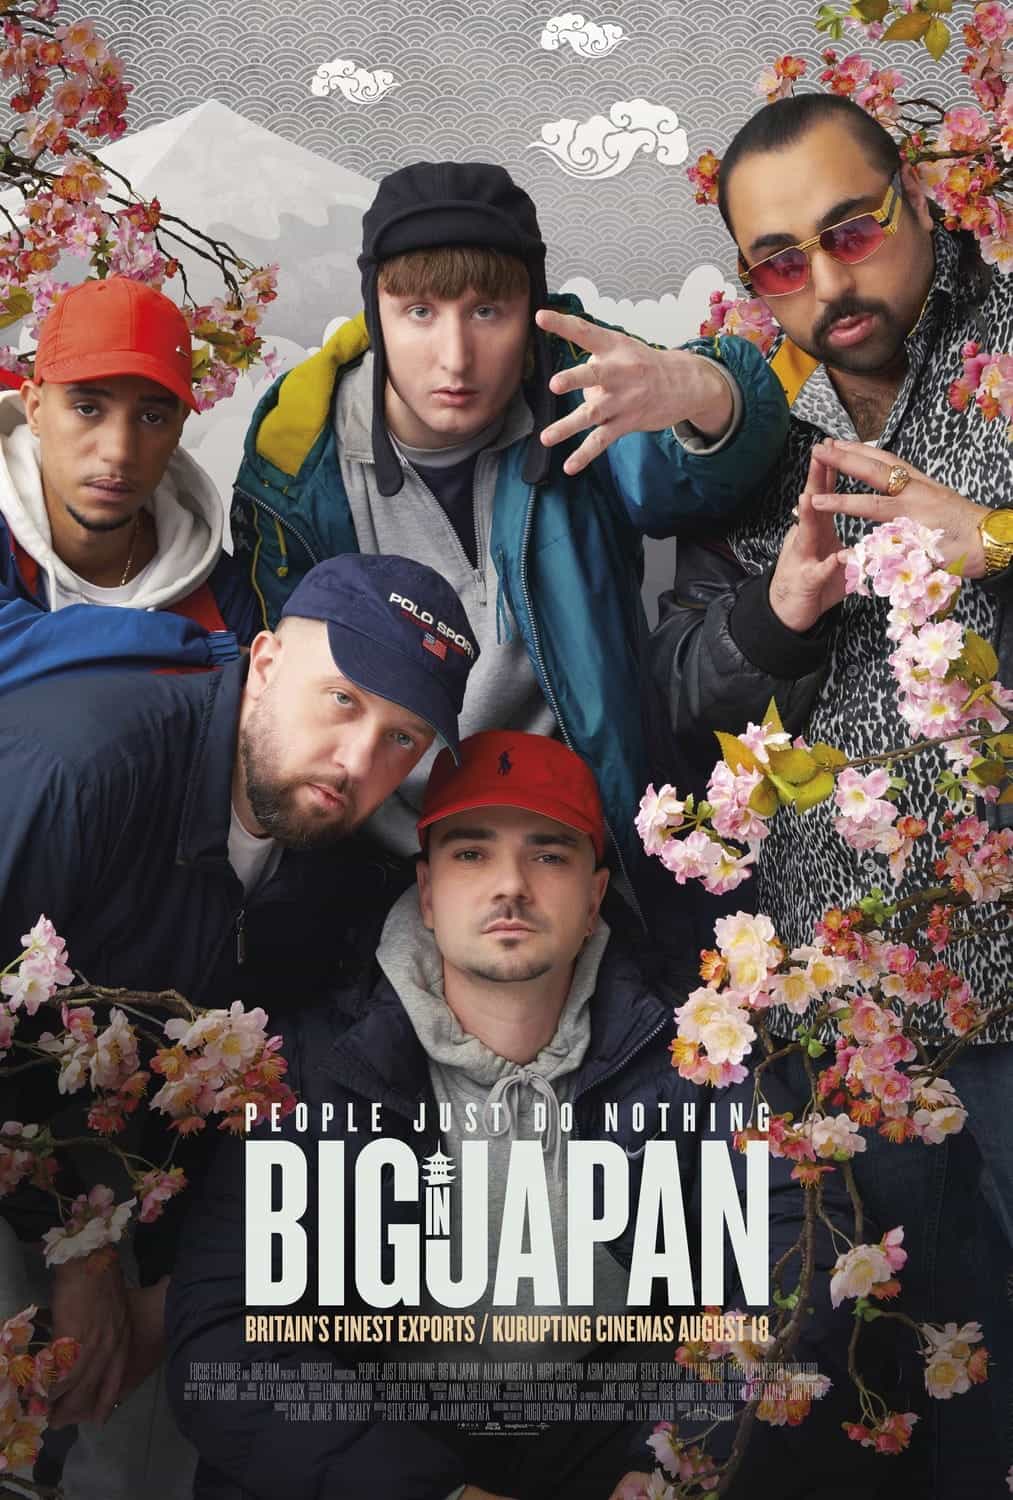 People Just Do Nothing: Big in Japan has been given a 15 age rating in the UK for strong language, drug references